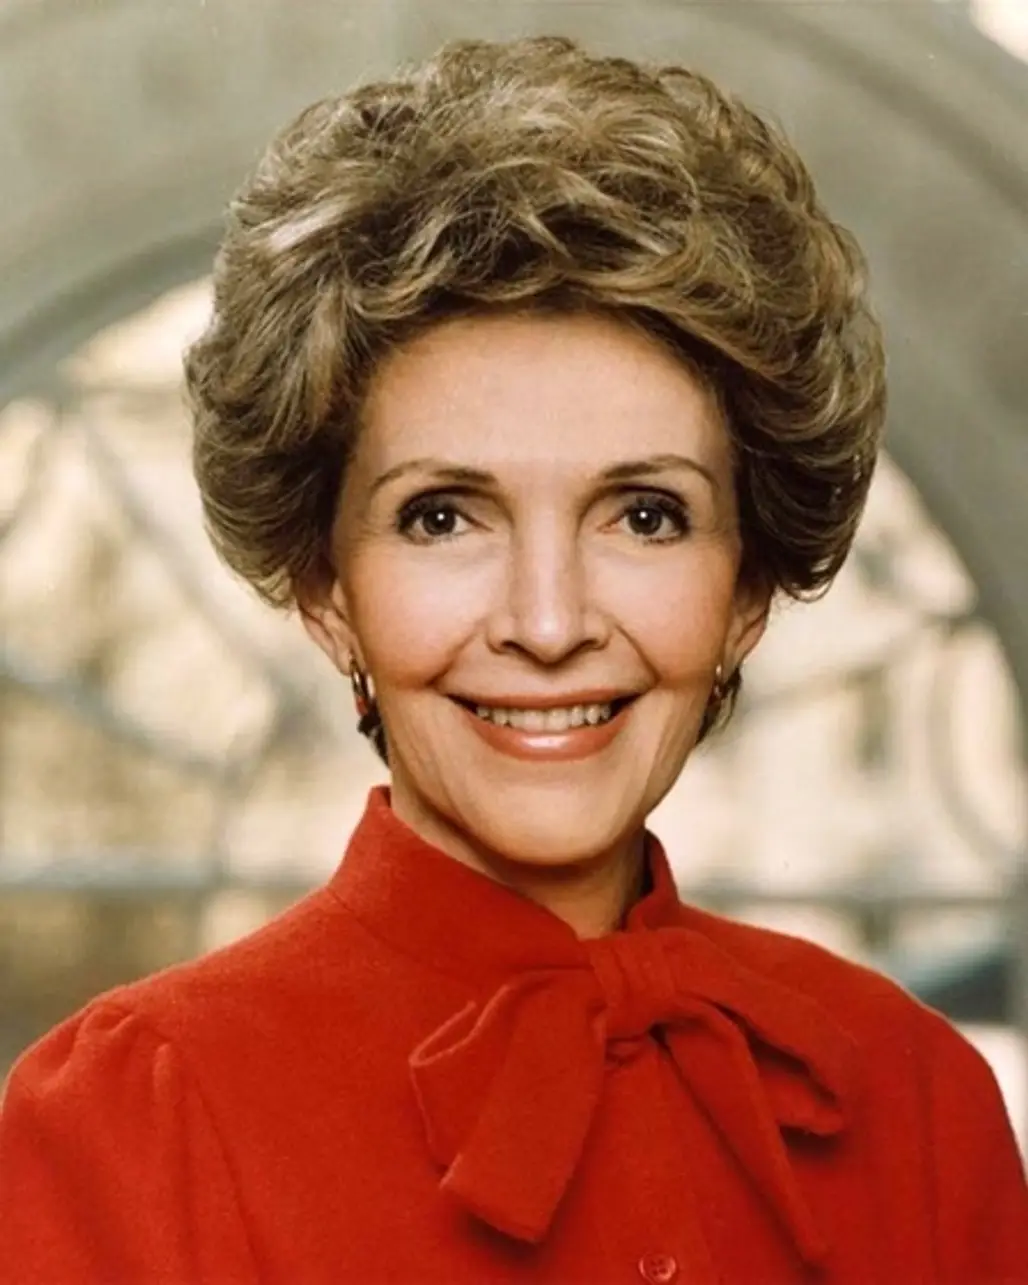 Nancy Reagan, Former First Lady of the United States of America